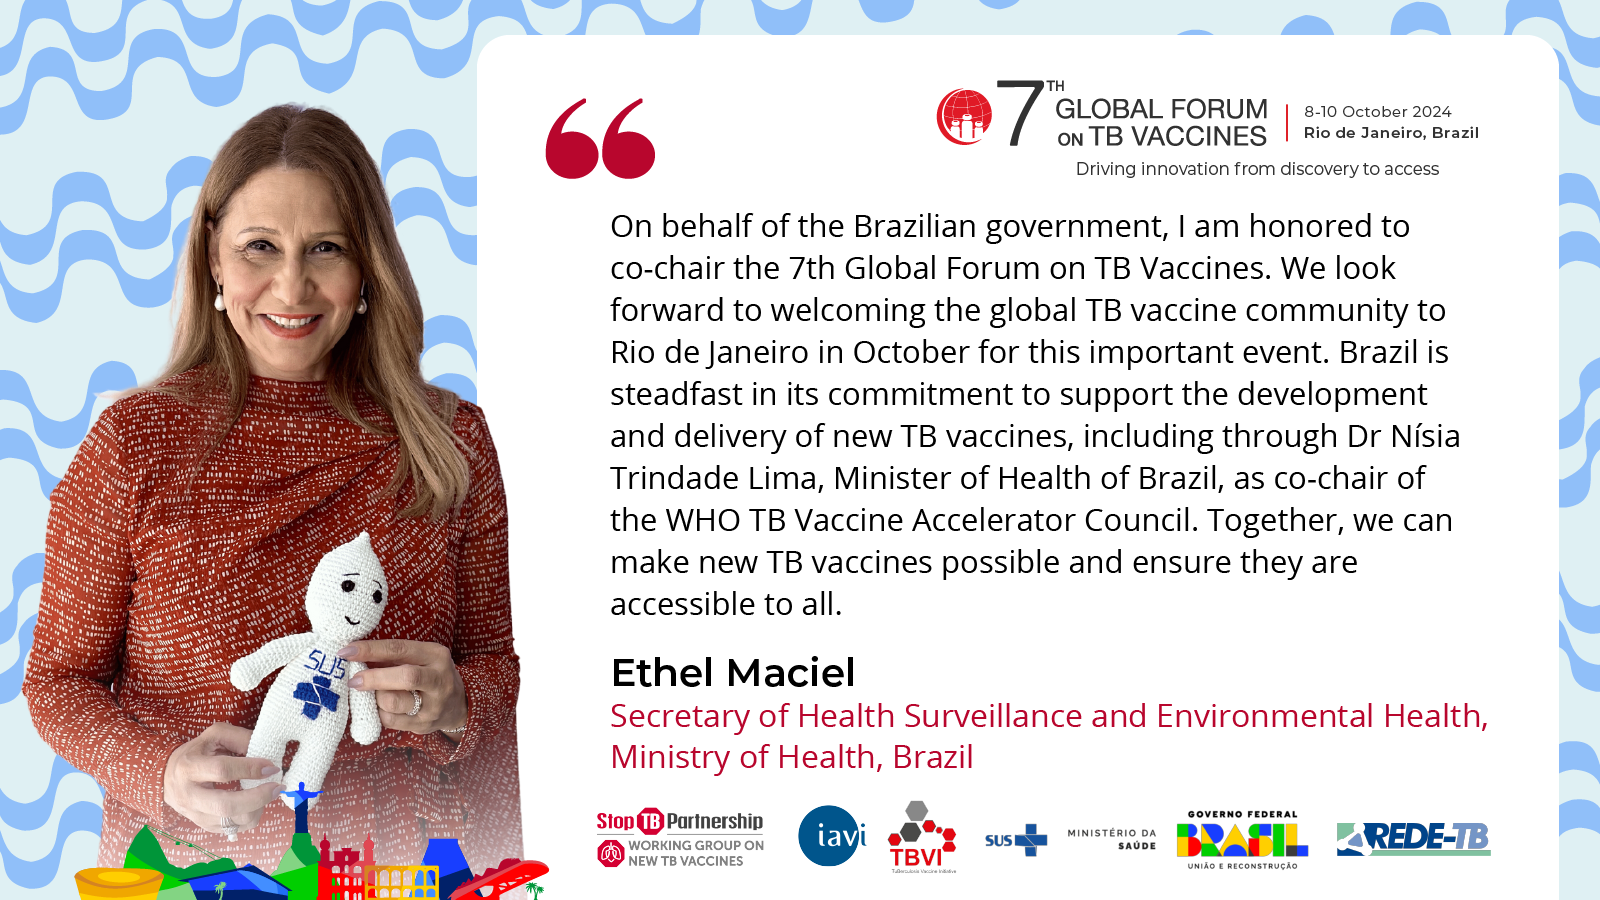 A graphic with a photo of Dr. Ethel Maciel, Secretary of Health Surveillance & Environmental Health, Ministry of Health, Brazil, co-chair of the 7th Global Forum on TB Vaccine with a quote reading: “On behalf of the Brazilian government, I am honored to co-chair the 7th Global Forum on TB Vaccines. We look forward to welcoming the global TB vaccine community to Rio de Janeiro in October for this important event. Brazil is steadfast in its commitment to support the development and delivery of new TB vaccines, including through Dr Nísia Trindade Lima, Minister of Health of Brazil, as co-chair of the WHO TB Vaccine Accelerator Council. Together, we can make new TB vaccines possible and ensure they are accessible to all.”